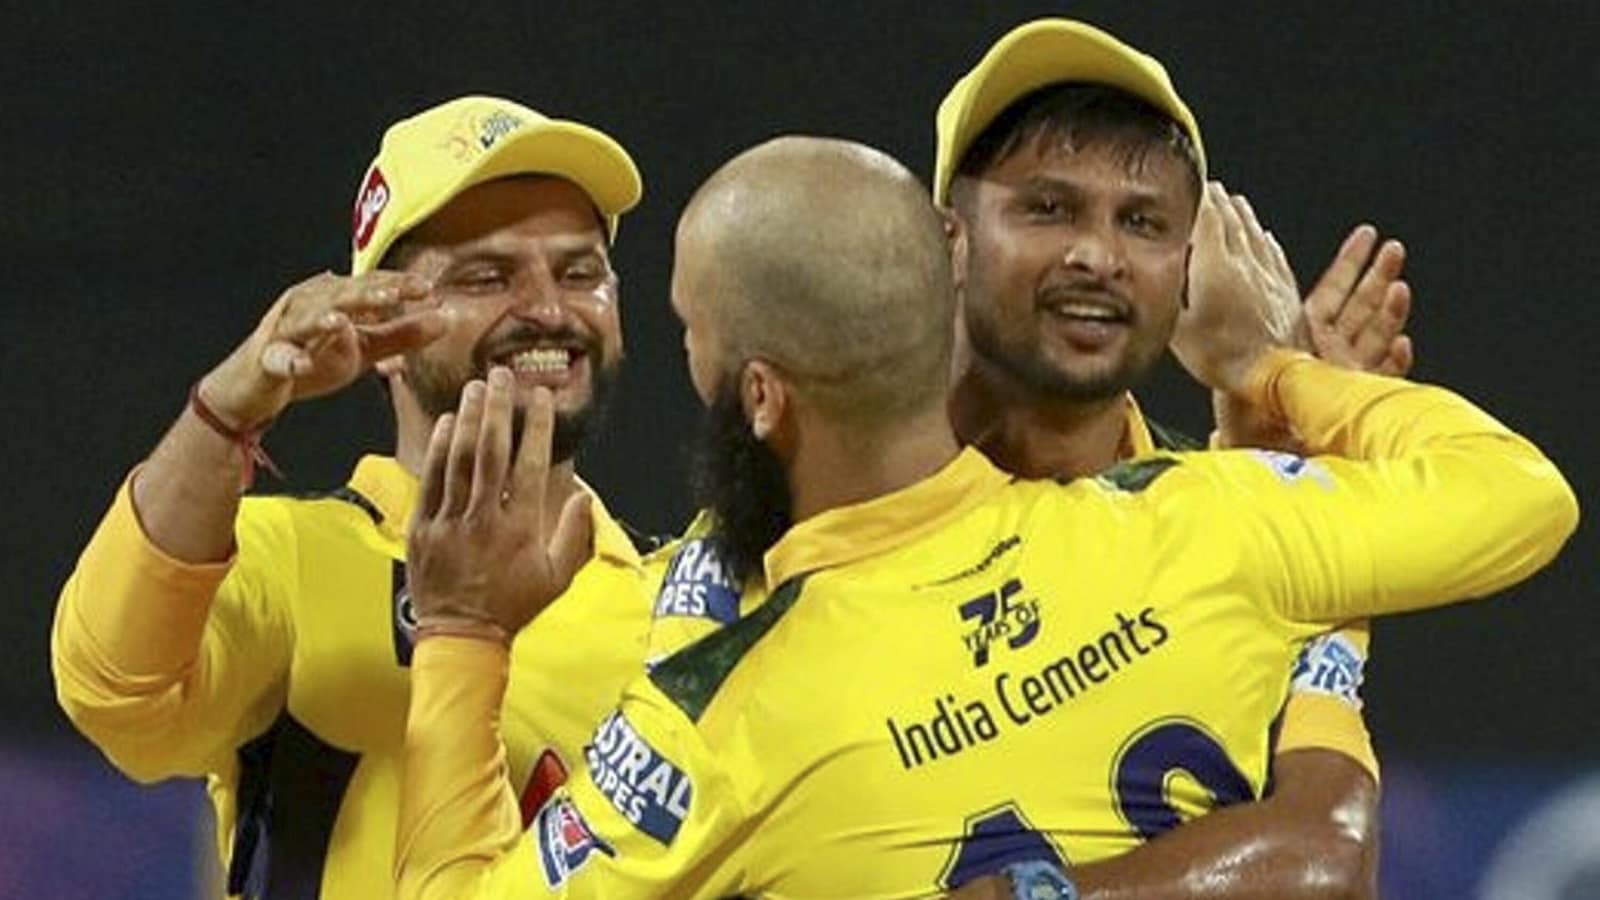 csk Moin Ali told secret that how to take 3 wickets